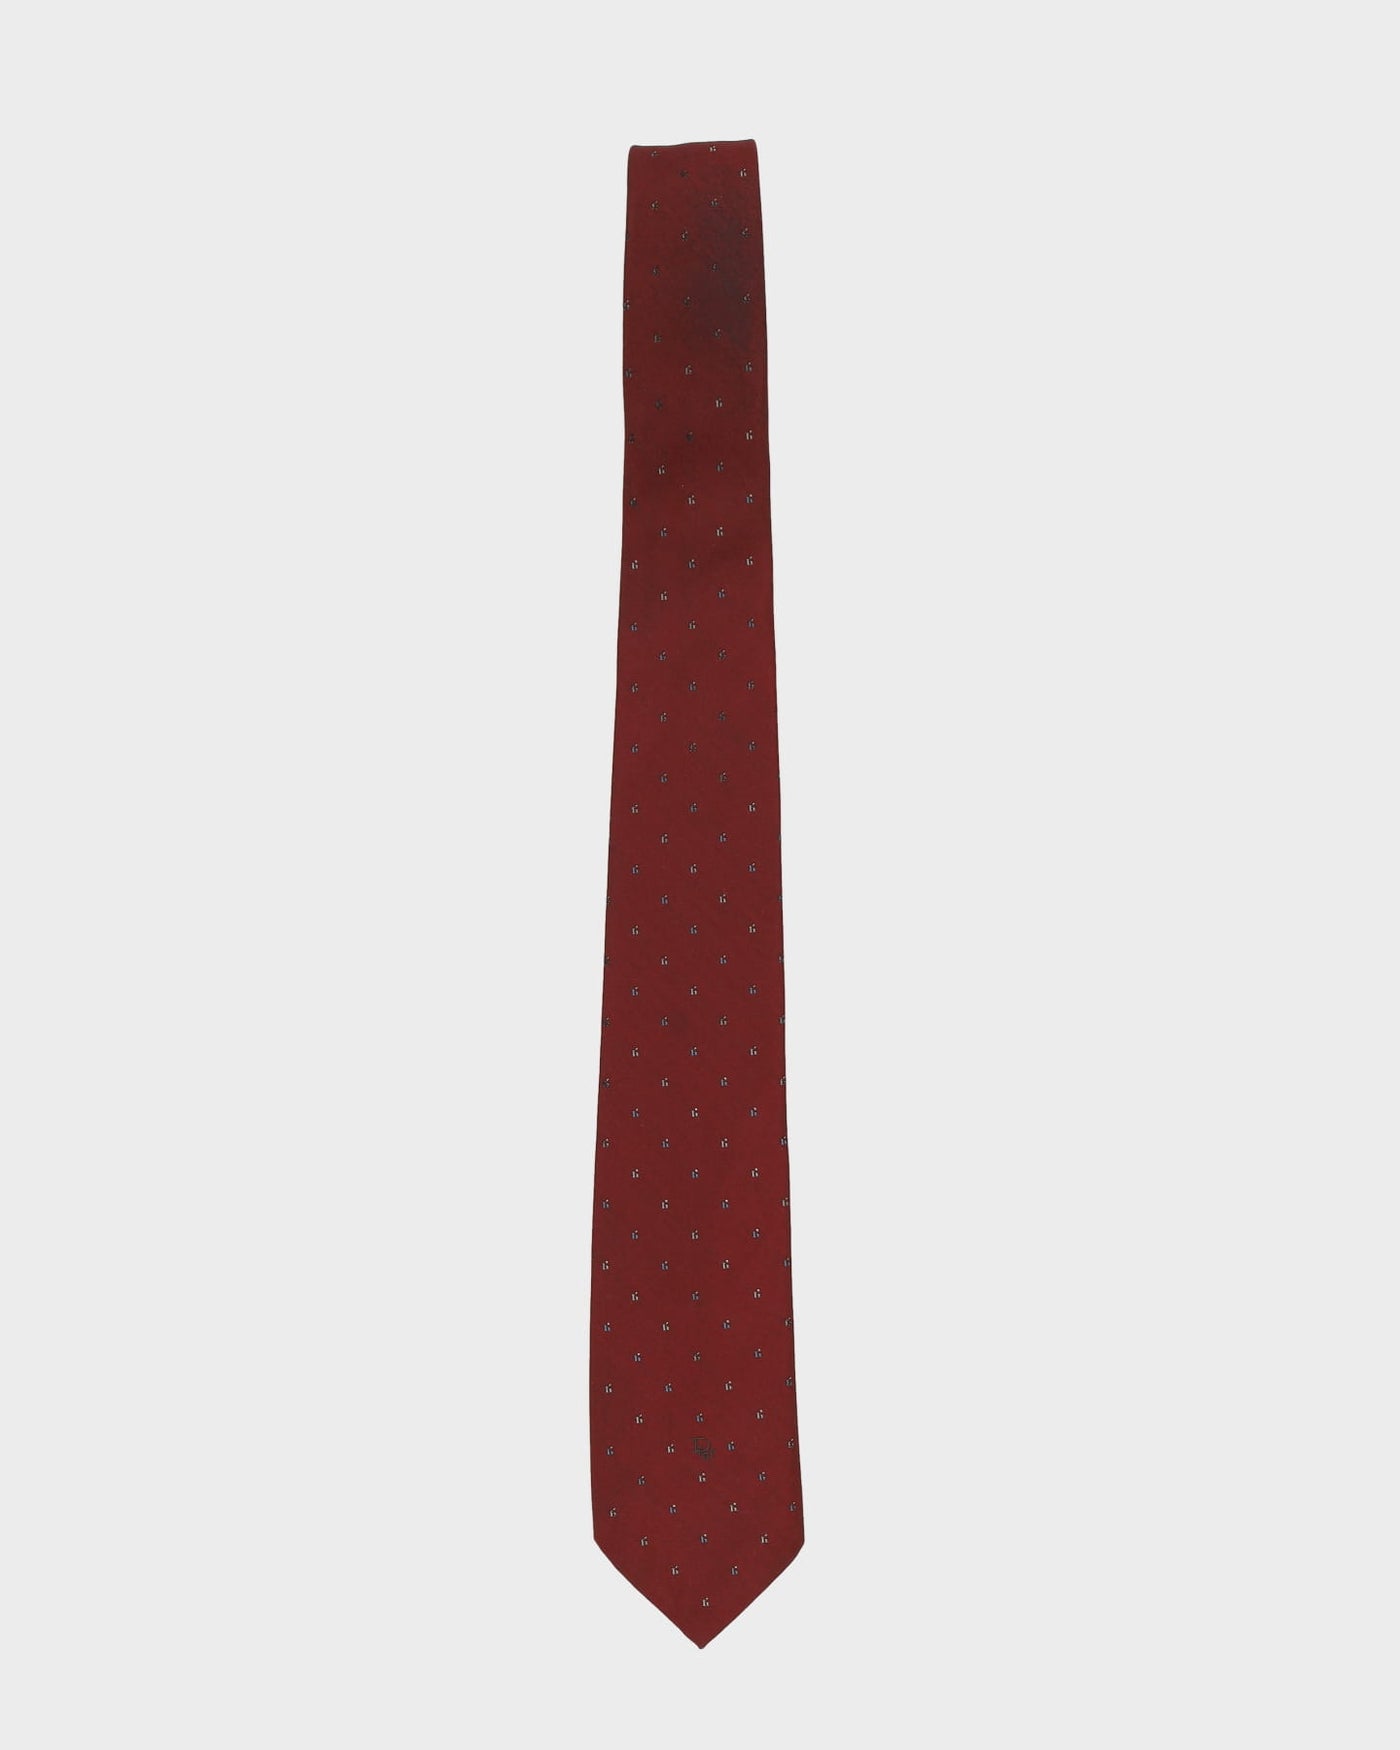 90s Christian Dior Burgundy Patterned Tie